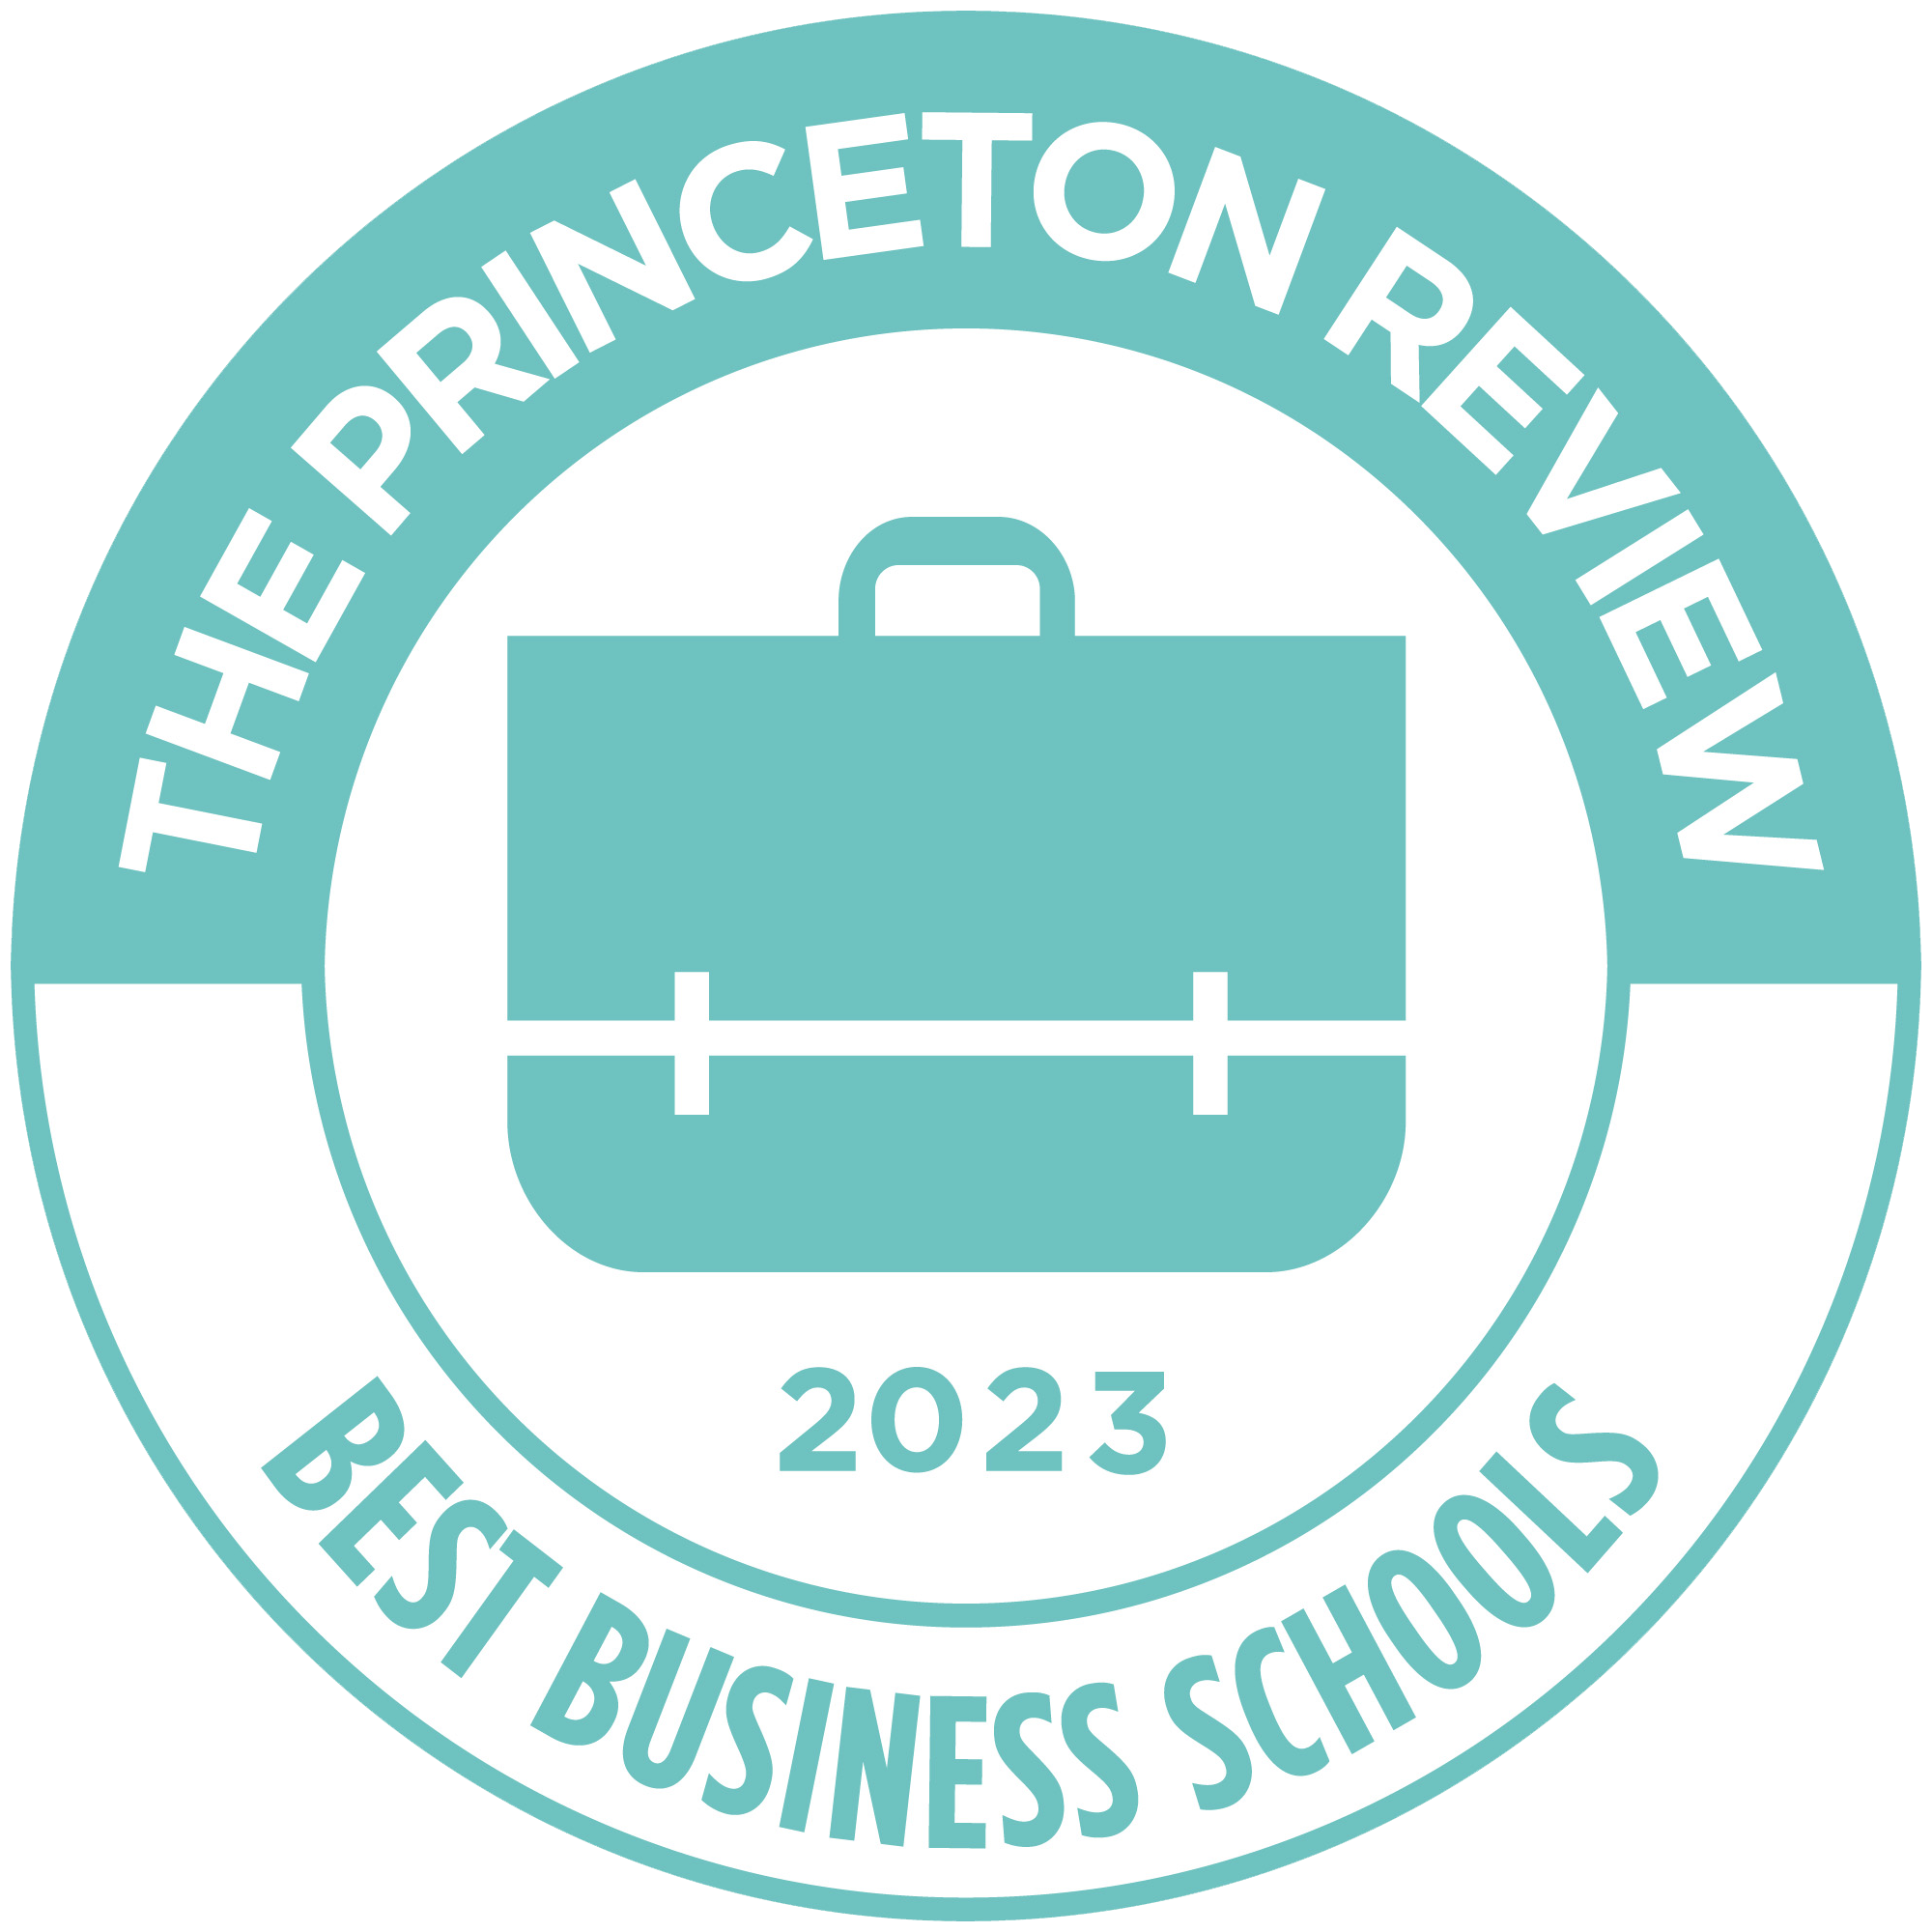 The Princeton Review: Best Business Schools, 2022